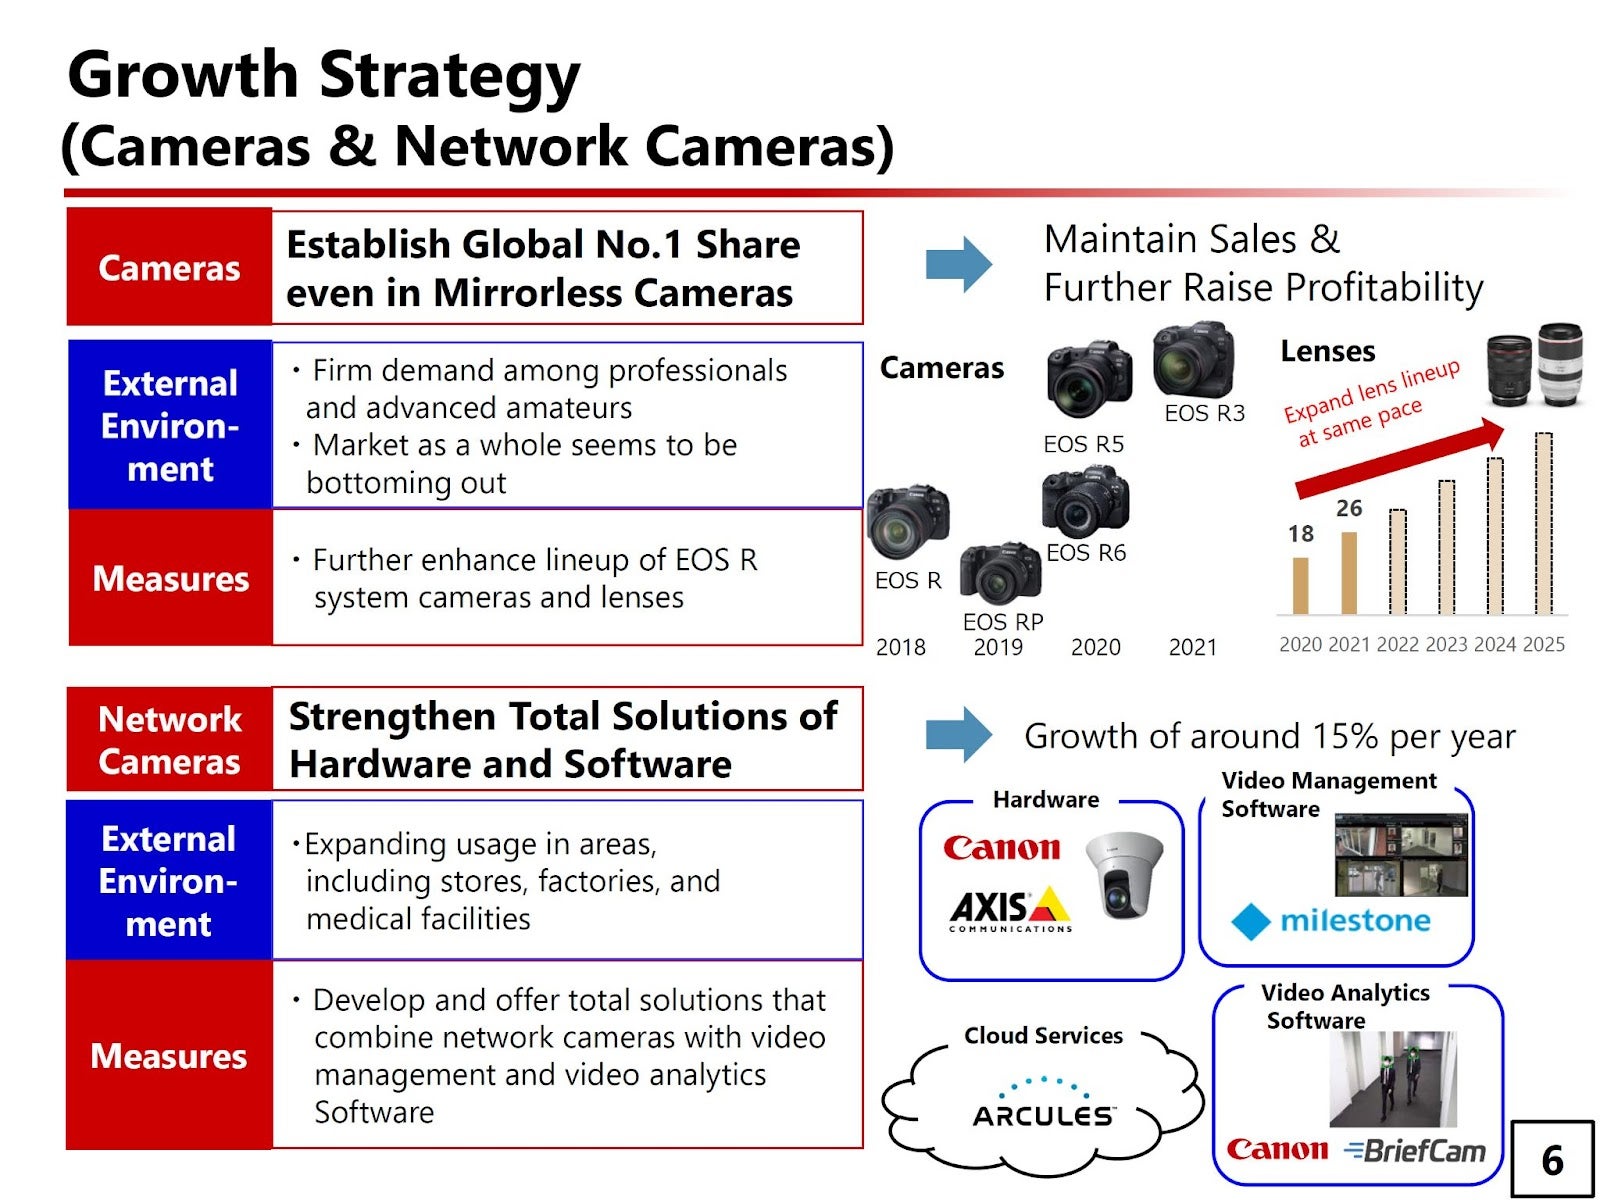 A chart showing Canon's sales and growth numbers looking back from 2022.